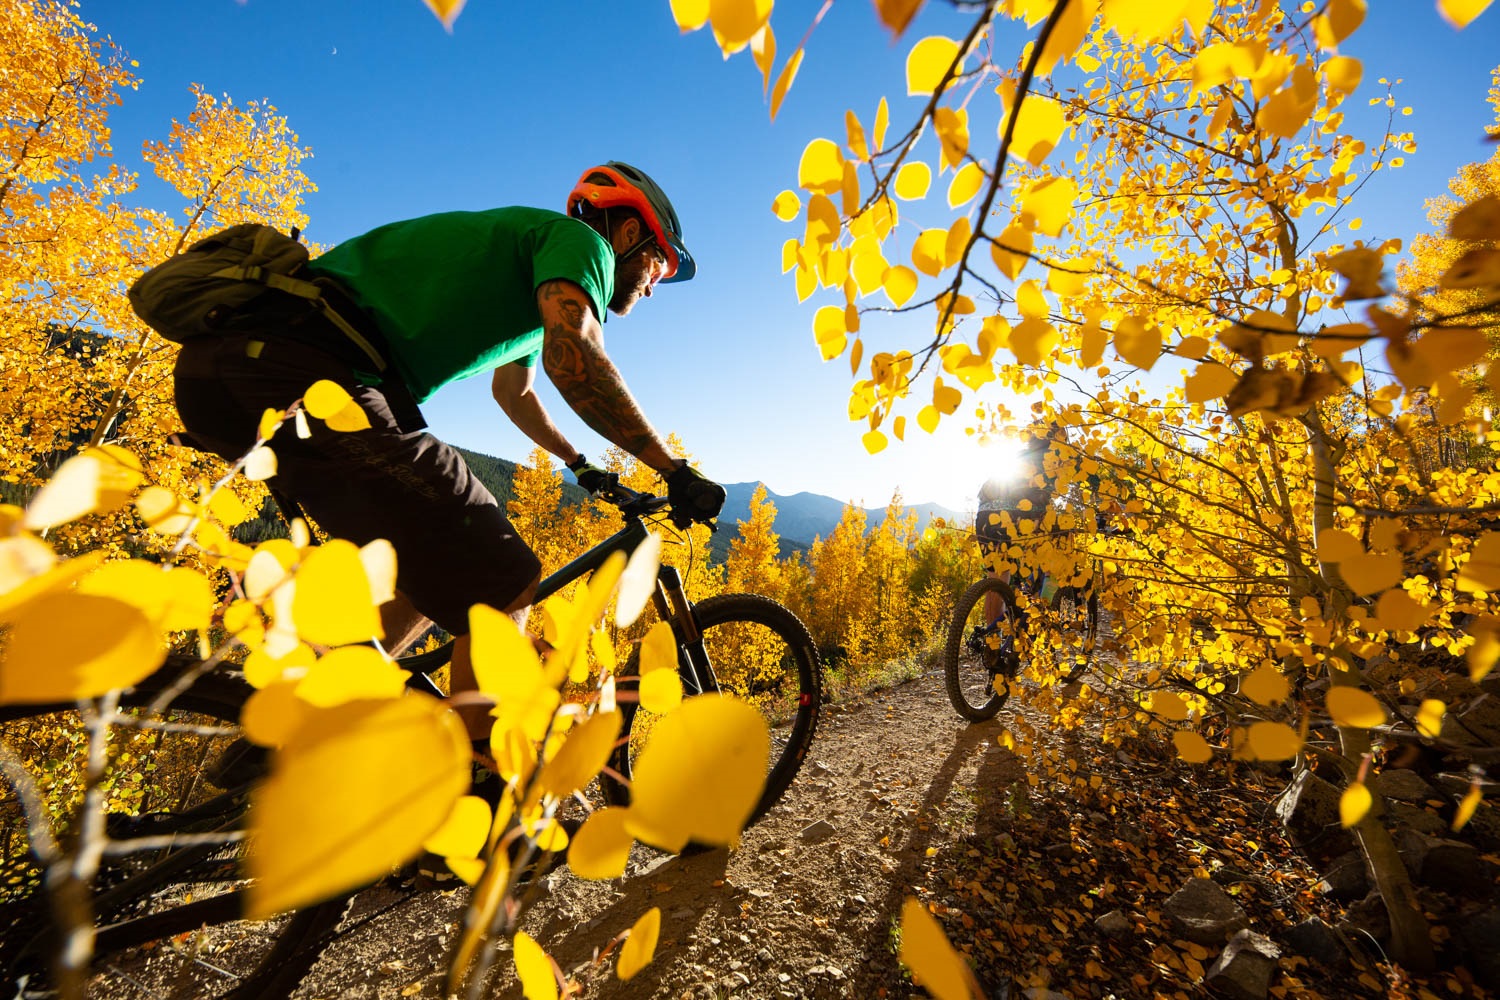 Mountain biker in Breckenridge surrounded by yellow leaves in fall